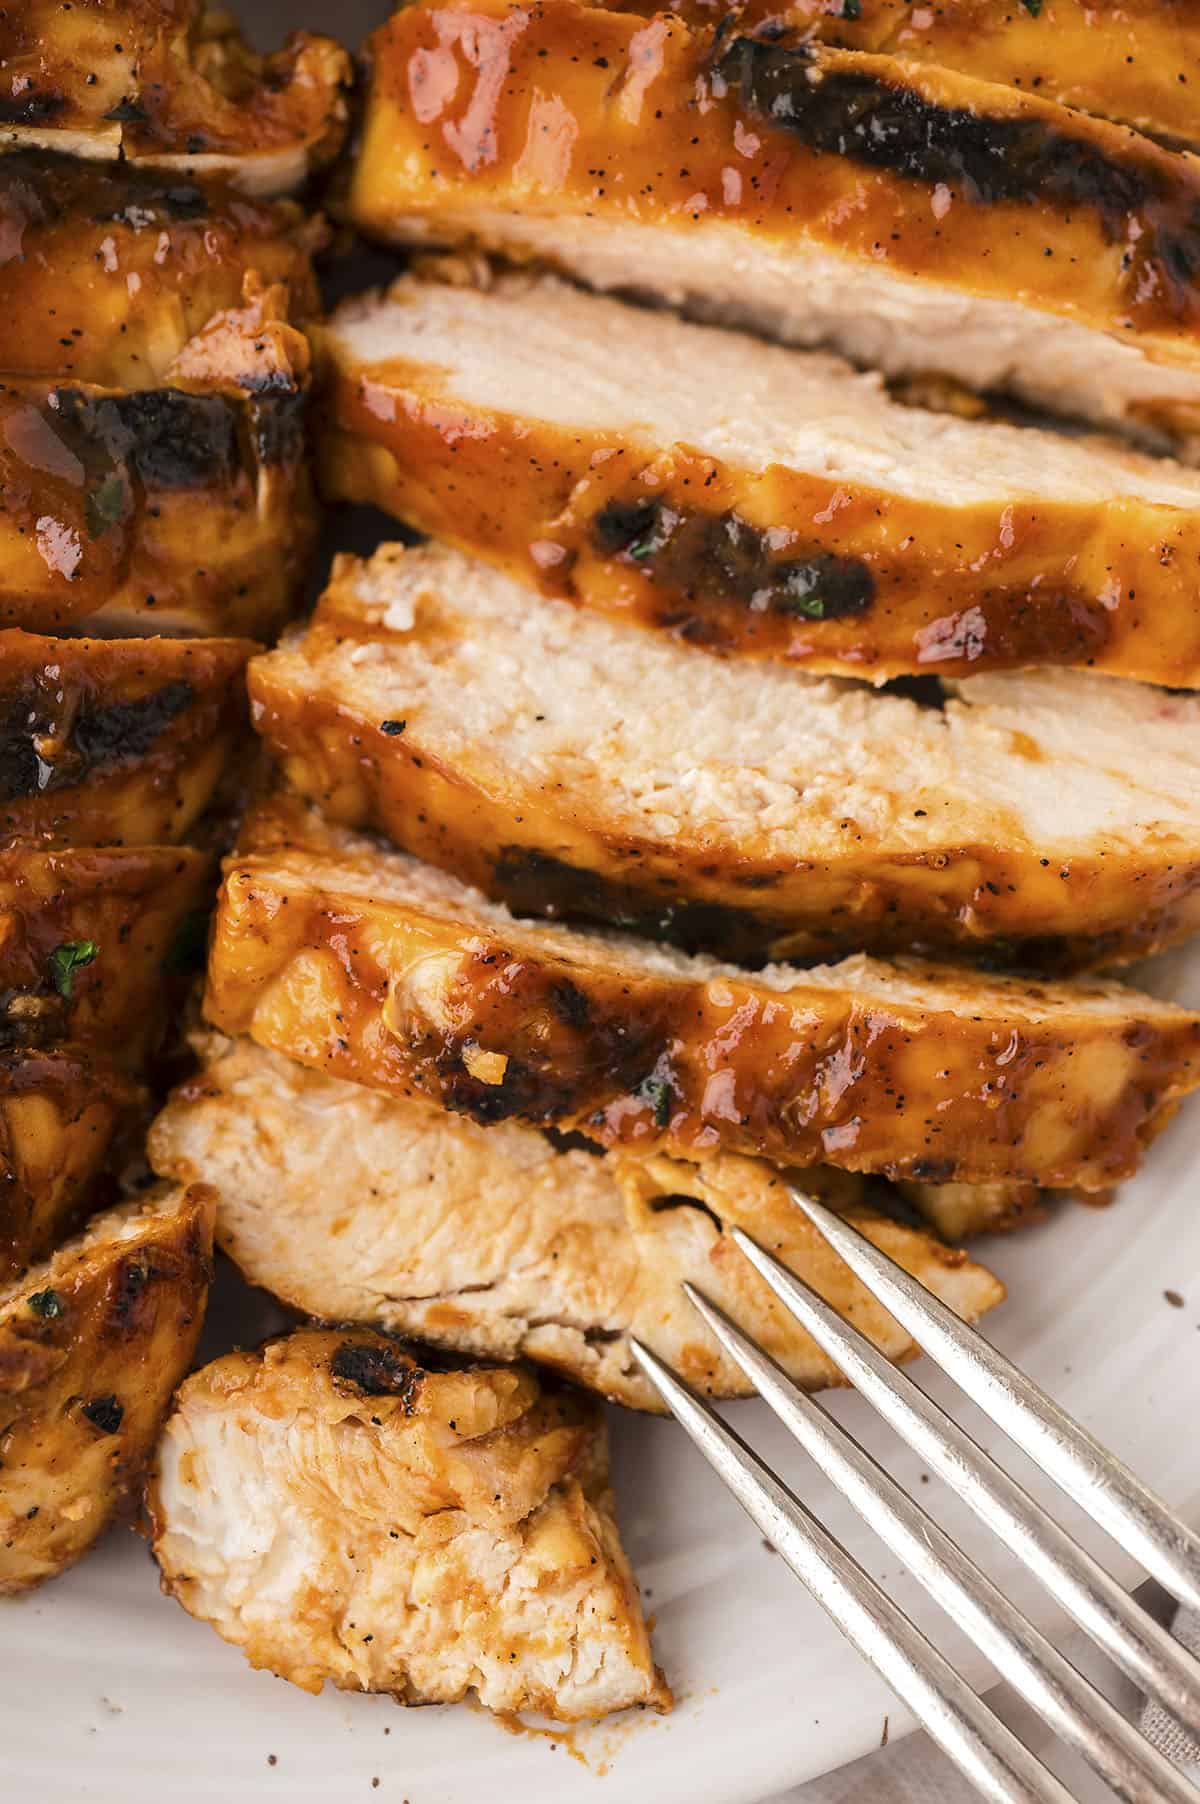 Sliced bbq grilled chicken on plate.